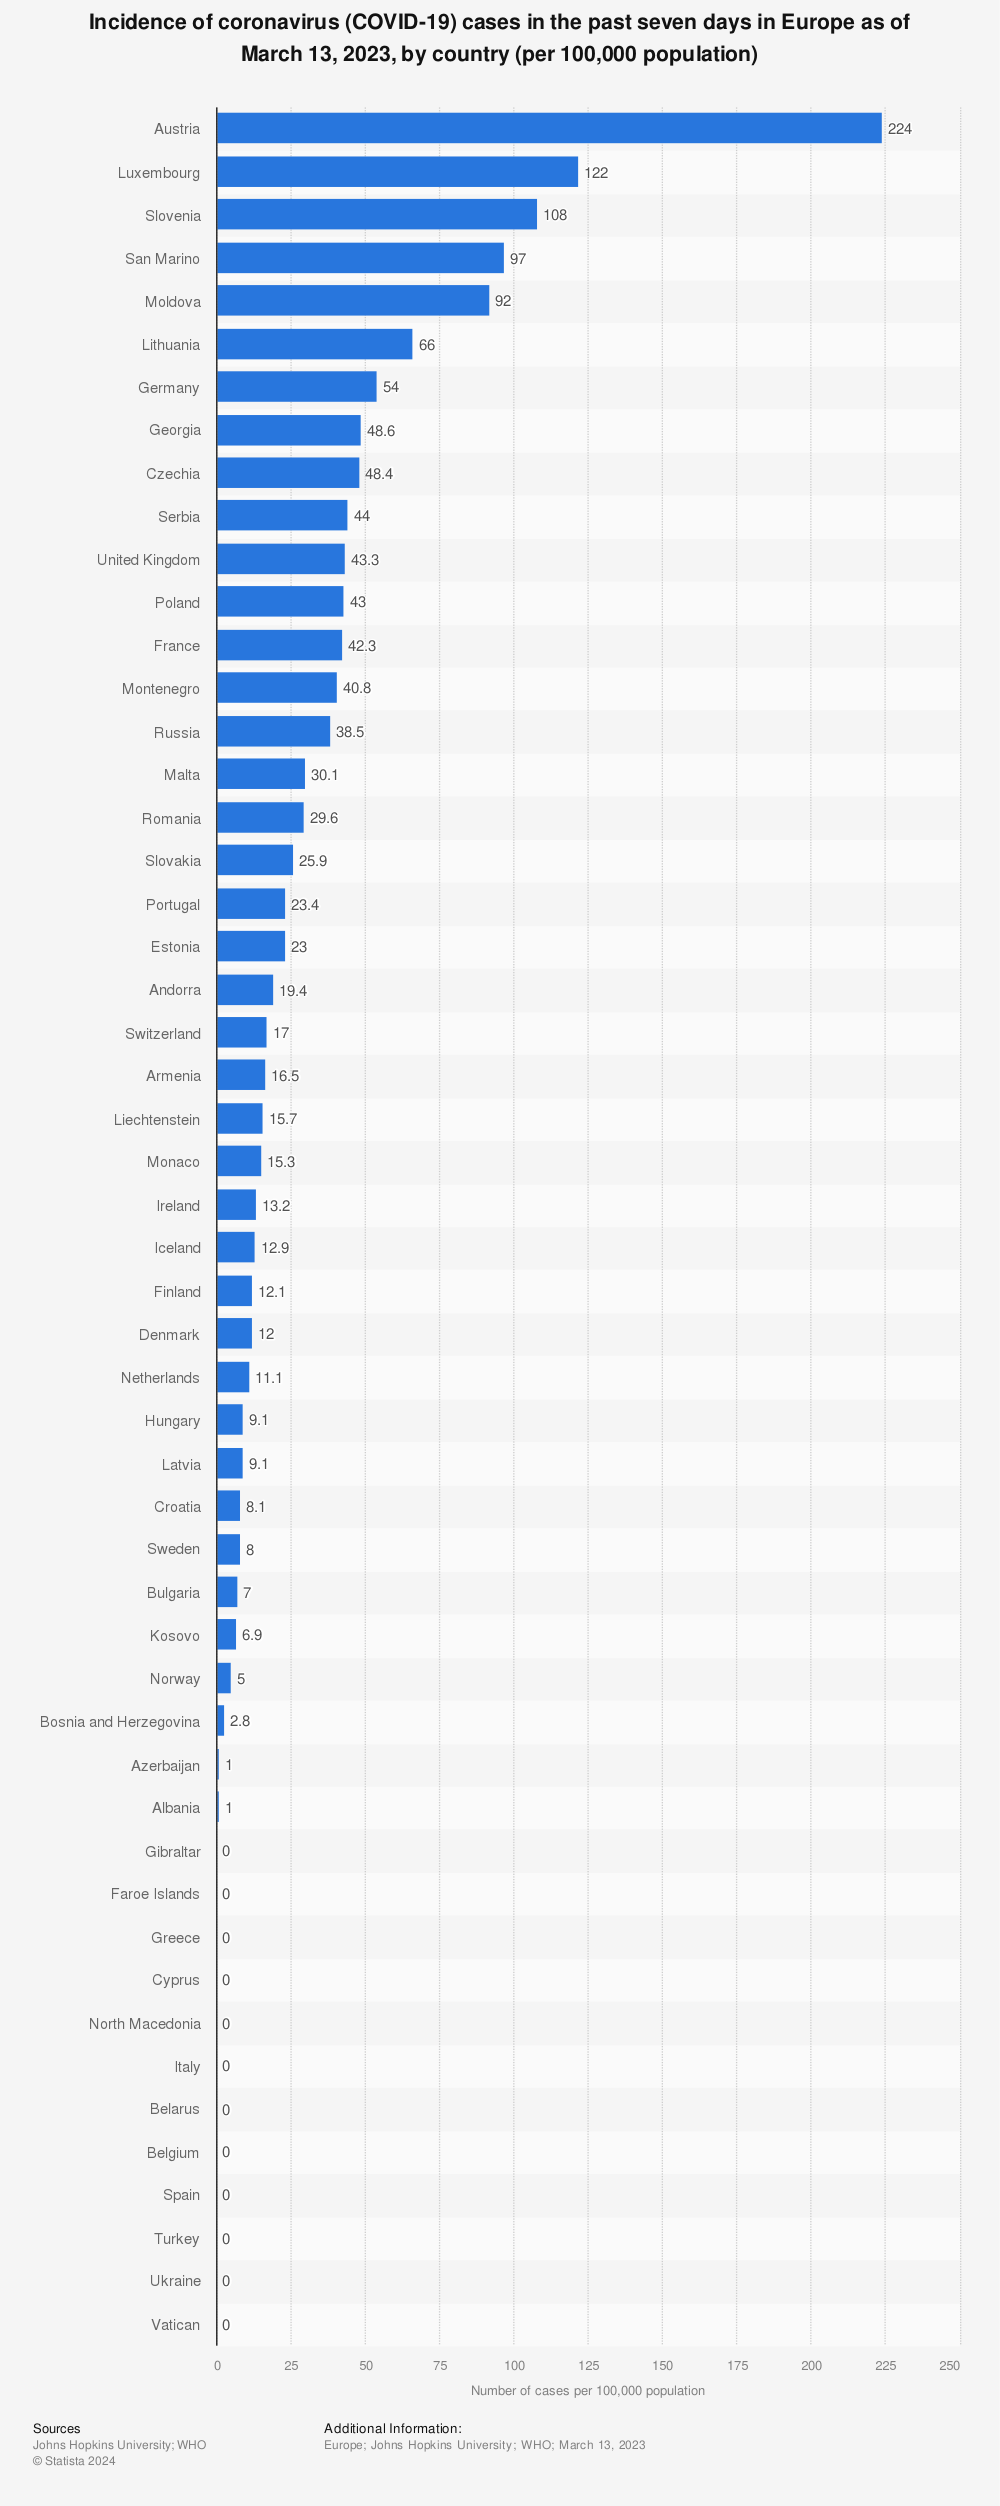 Statistic: Incidence of coronavirus (COVID-19) cases in the past seven days in Europe as of November 22, 2021, by country (per 100,000 population) | Statista